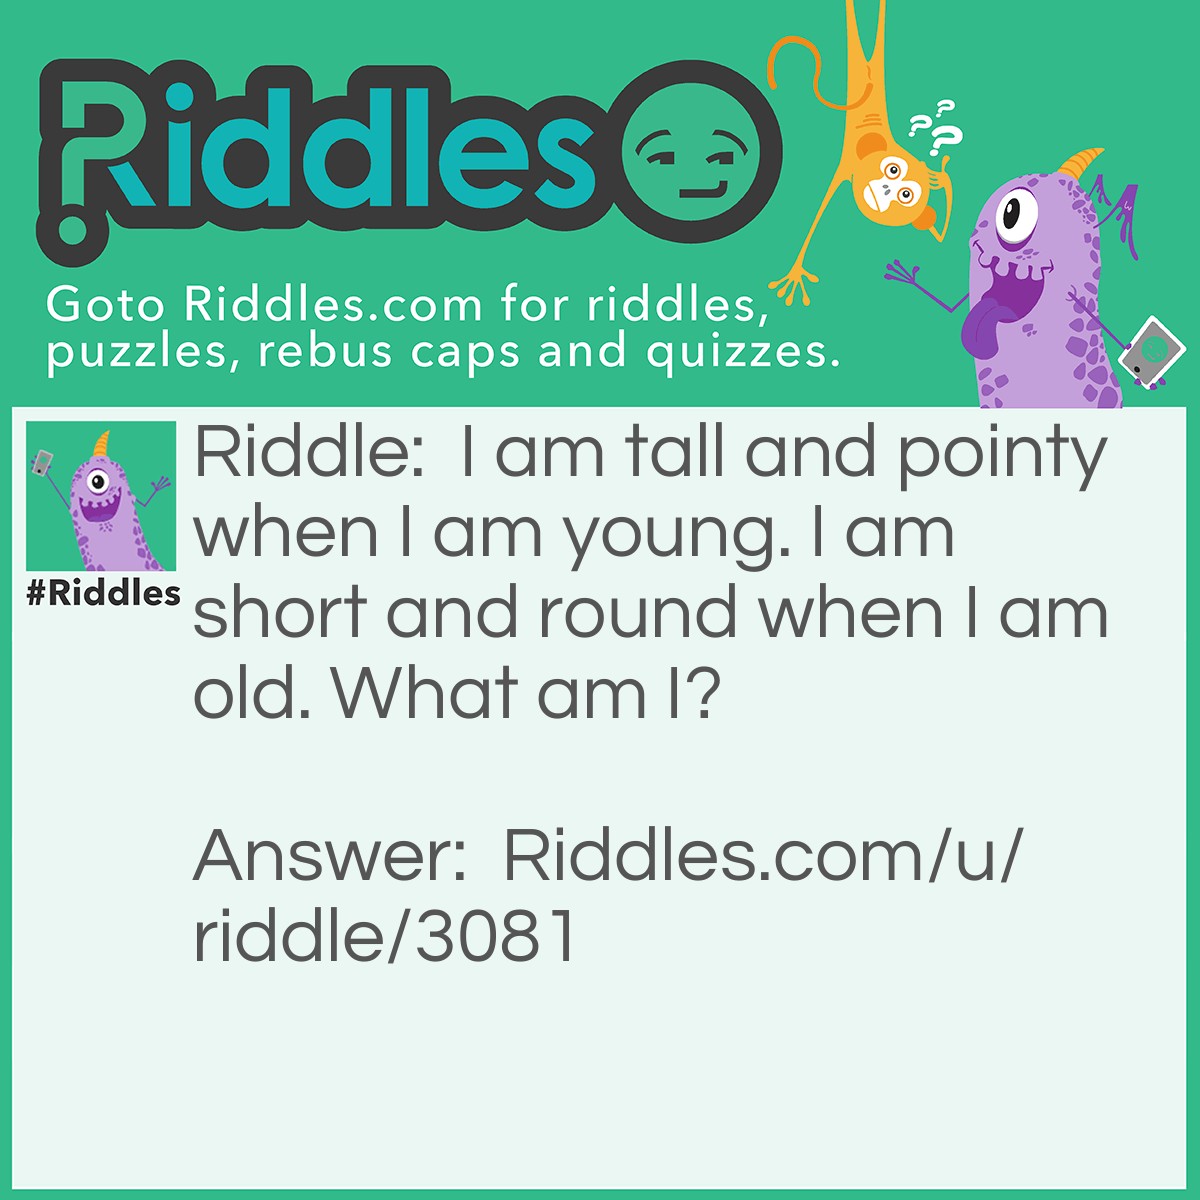 Riddle: I am tall and pointy when I am young. I am short and round when I am old. What am I? Answer: A mountain. A mountain is pointy when it is young and round when it is old.